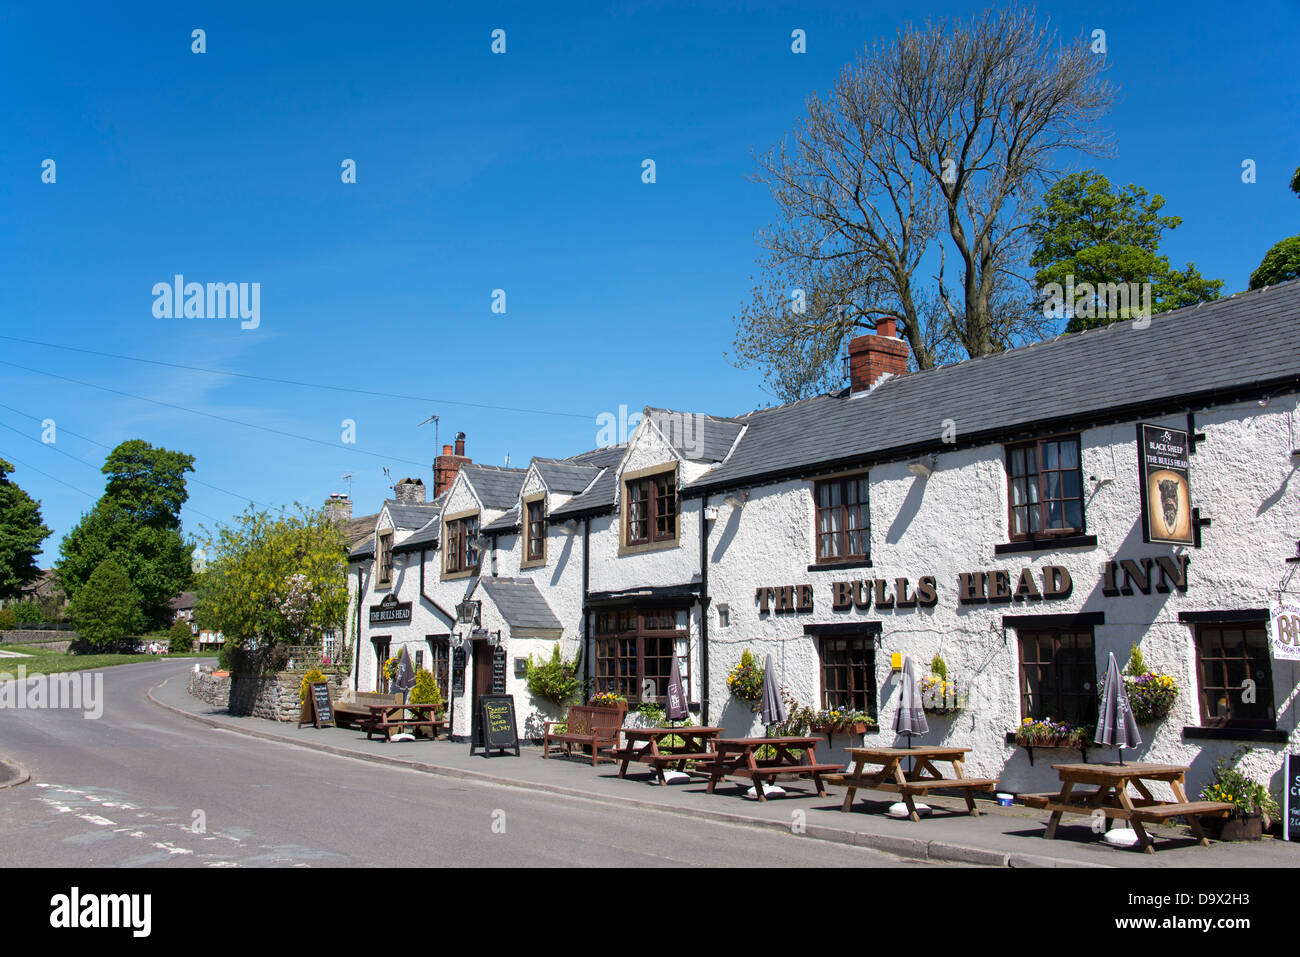 The Bull's Head public house, Foolow, Peak District National Park, Derbyshire, England. Stock Photo